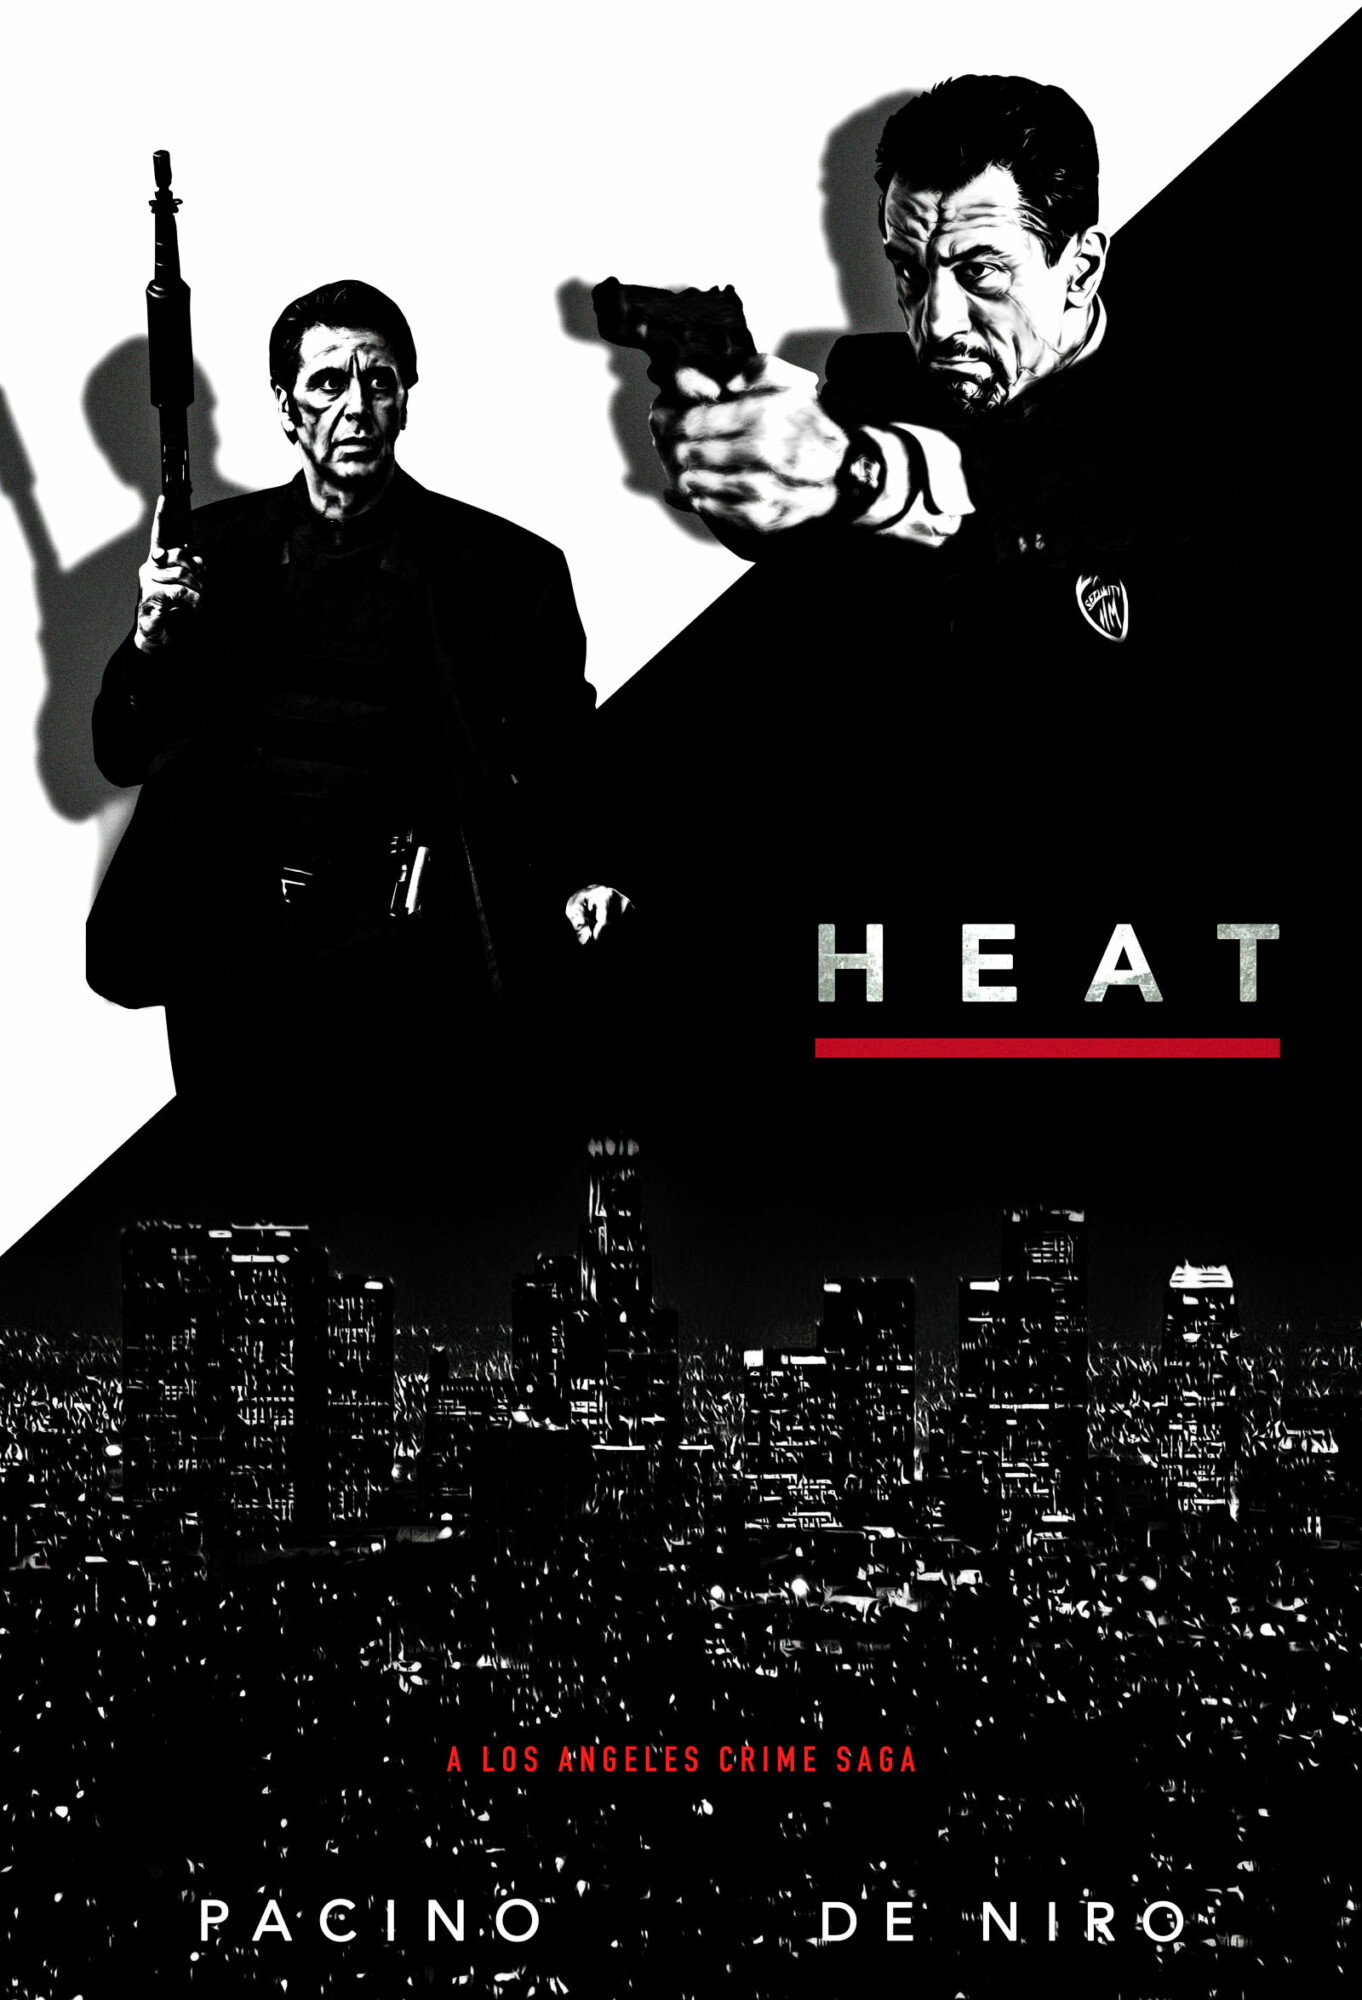 48 Top Images Body Heat Movie Poster - Movie Review: "In the Heat of the Night" (1967) | Lolo ...